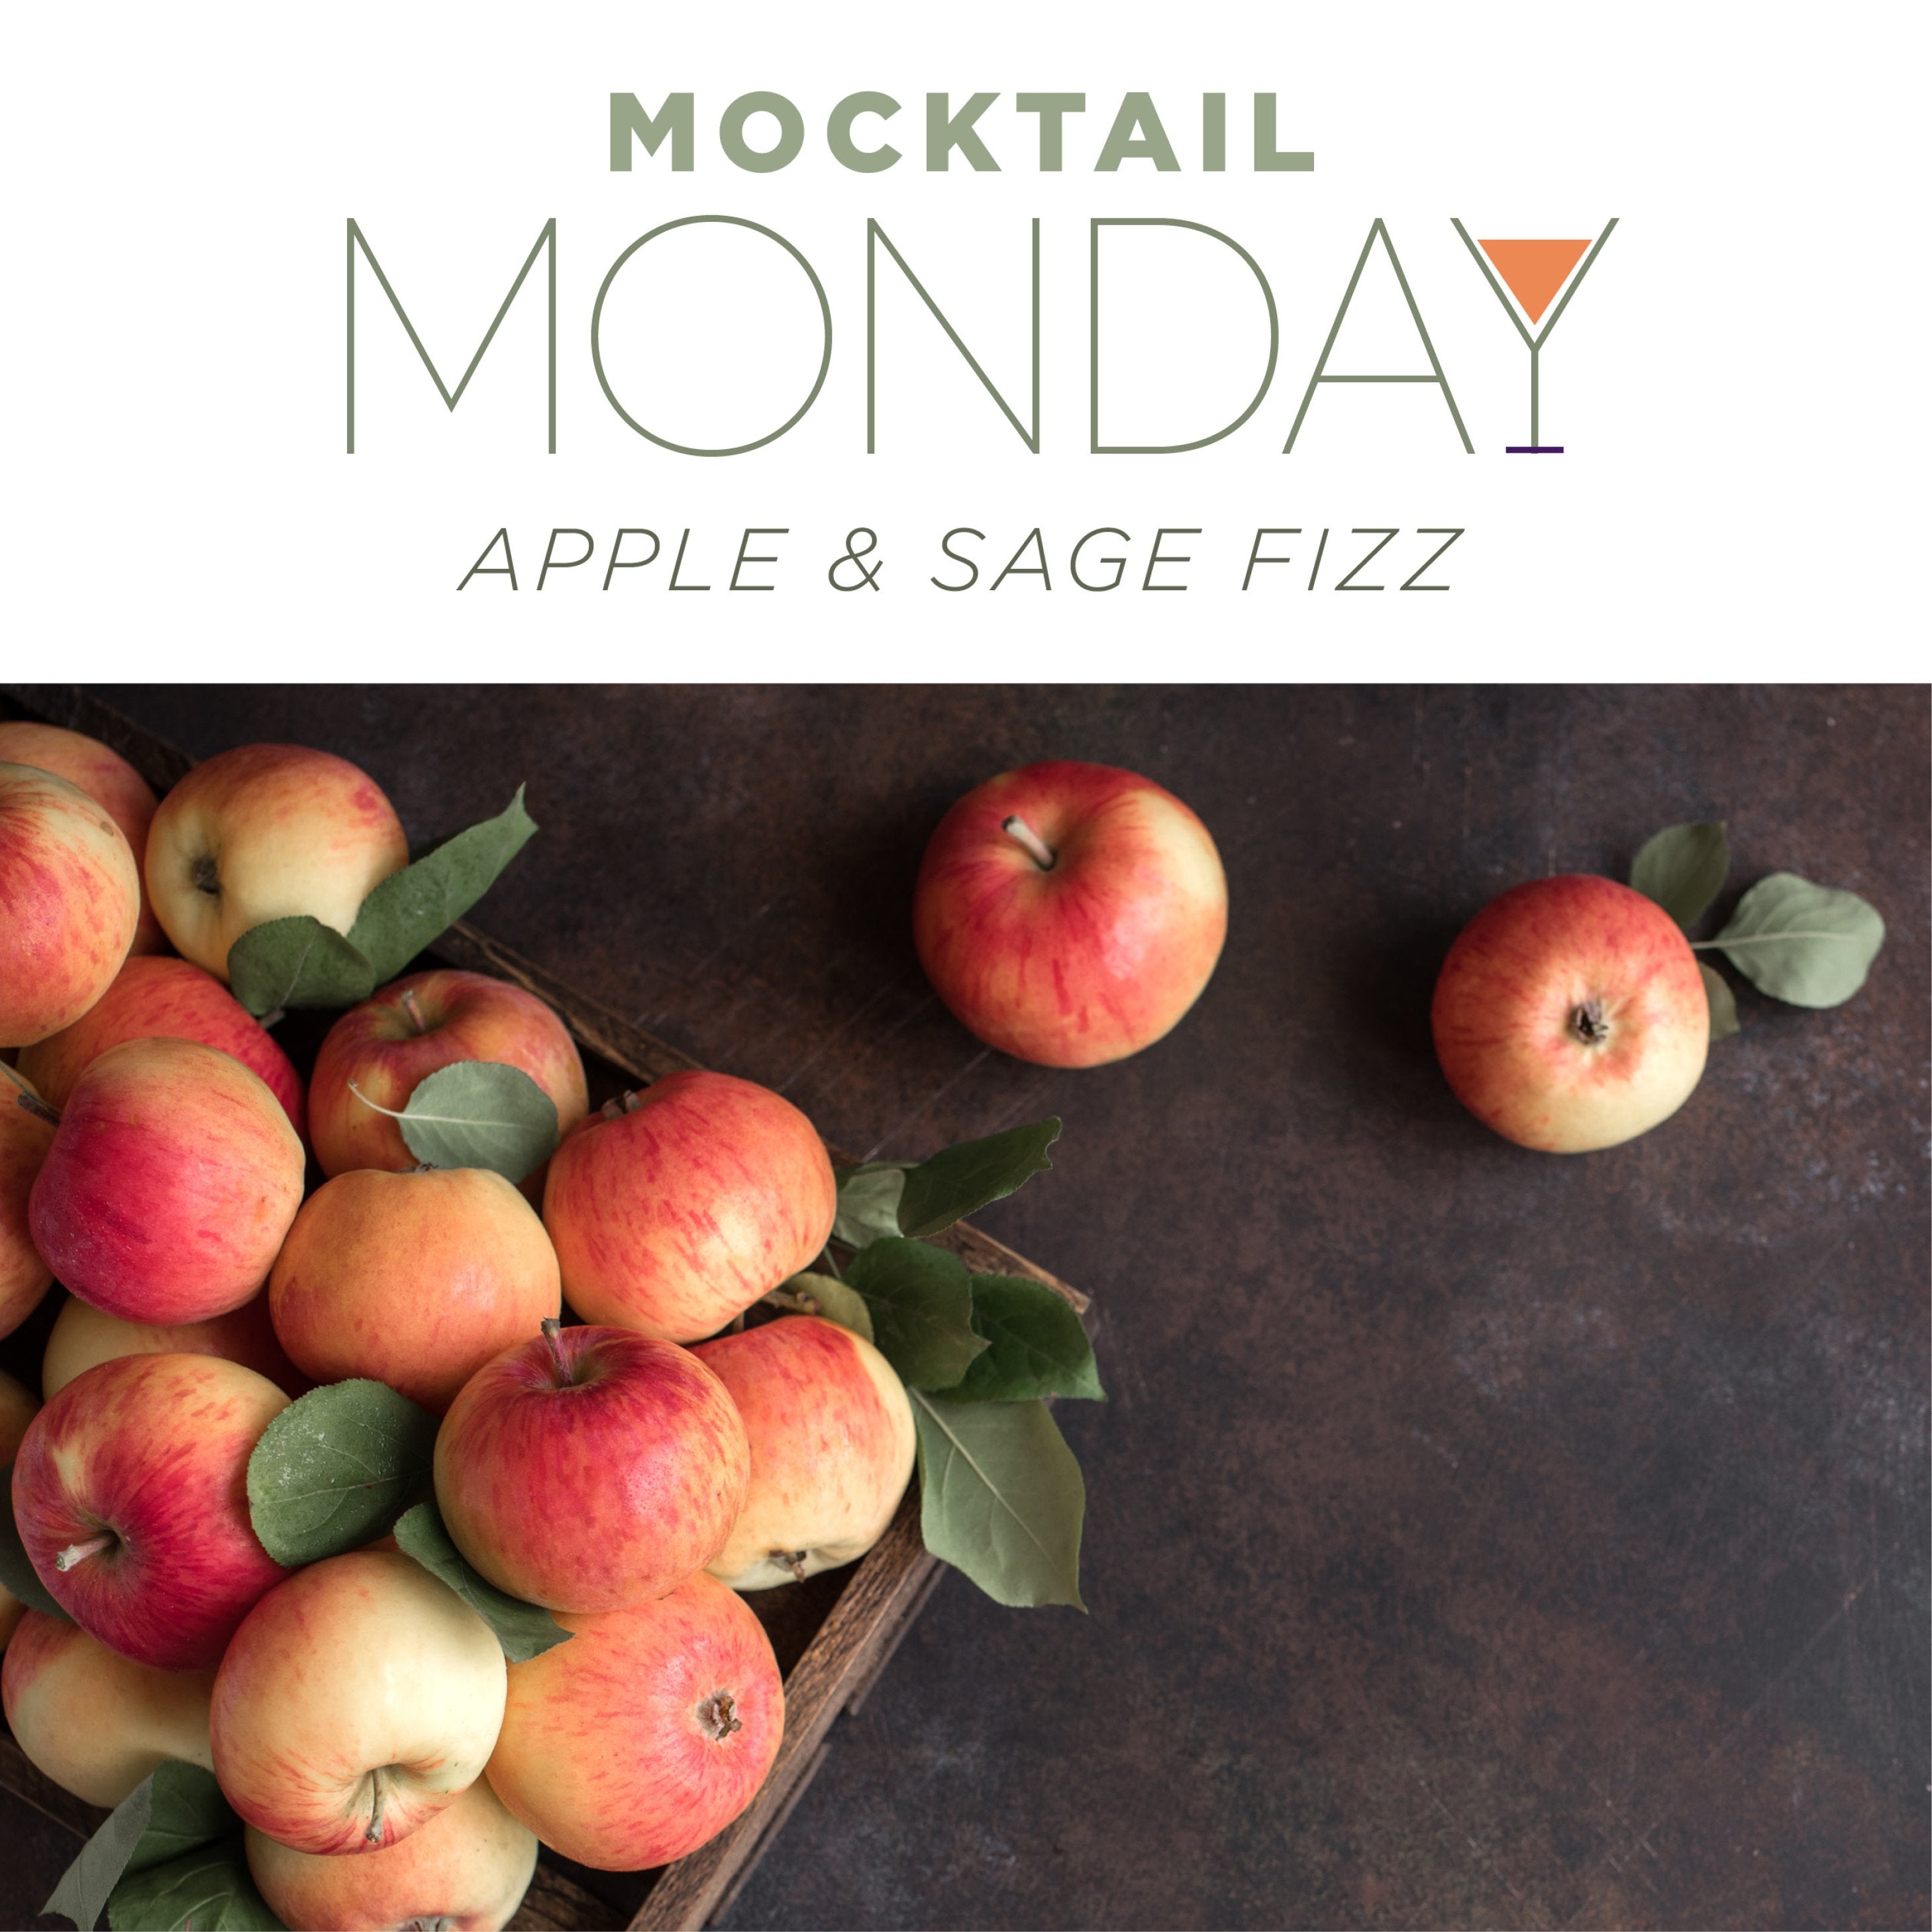 3 Apple & Sage Fizz Mocktail Recipes for the Holidays